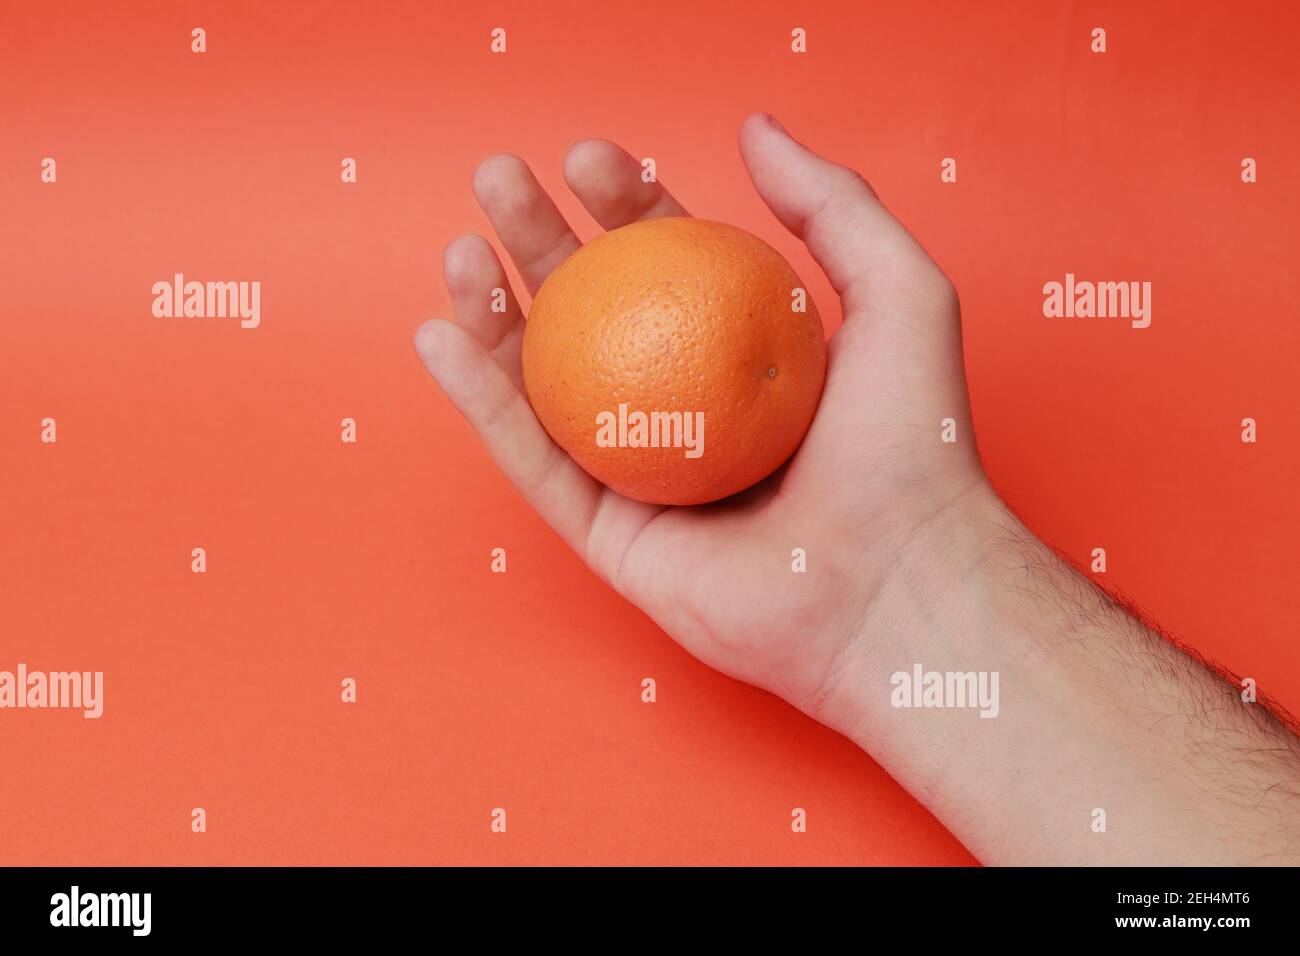 young man hand detail holding a organic orange Stock Photo